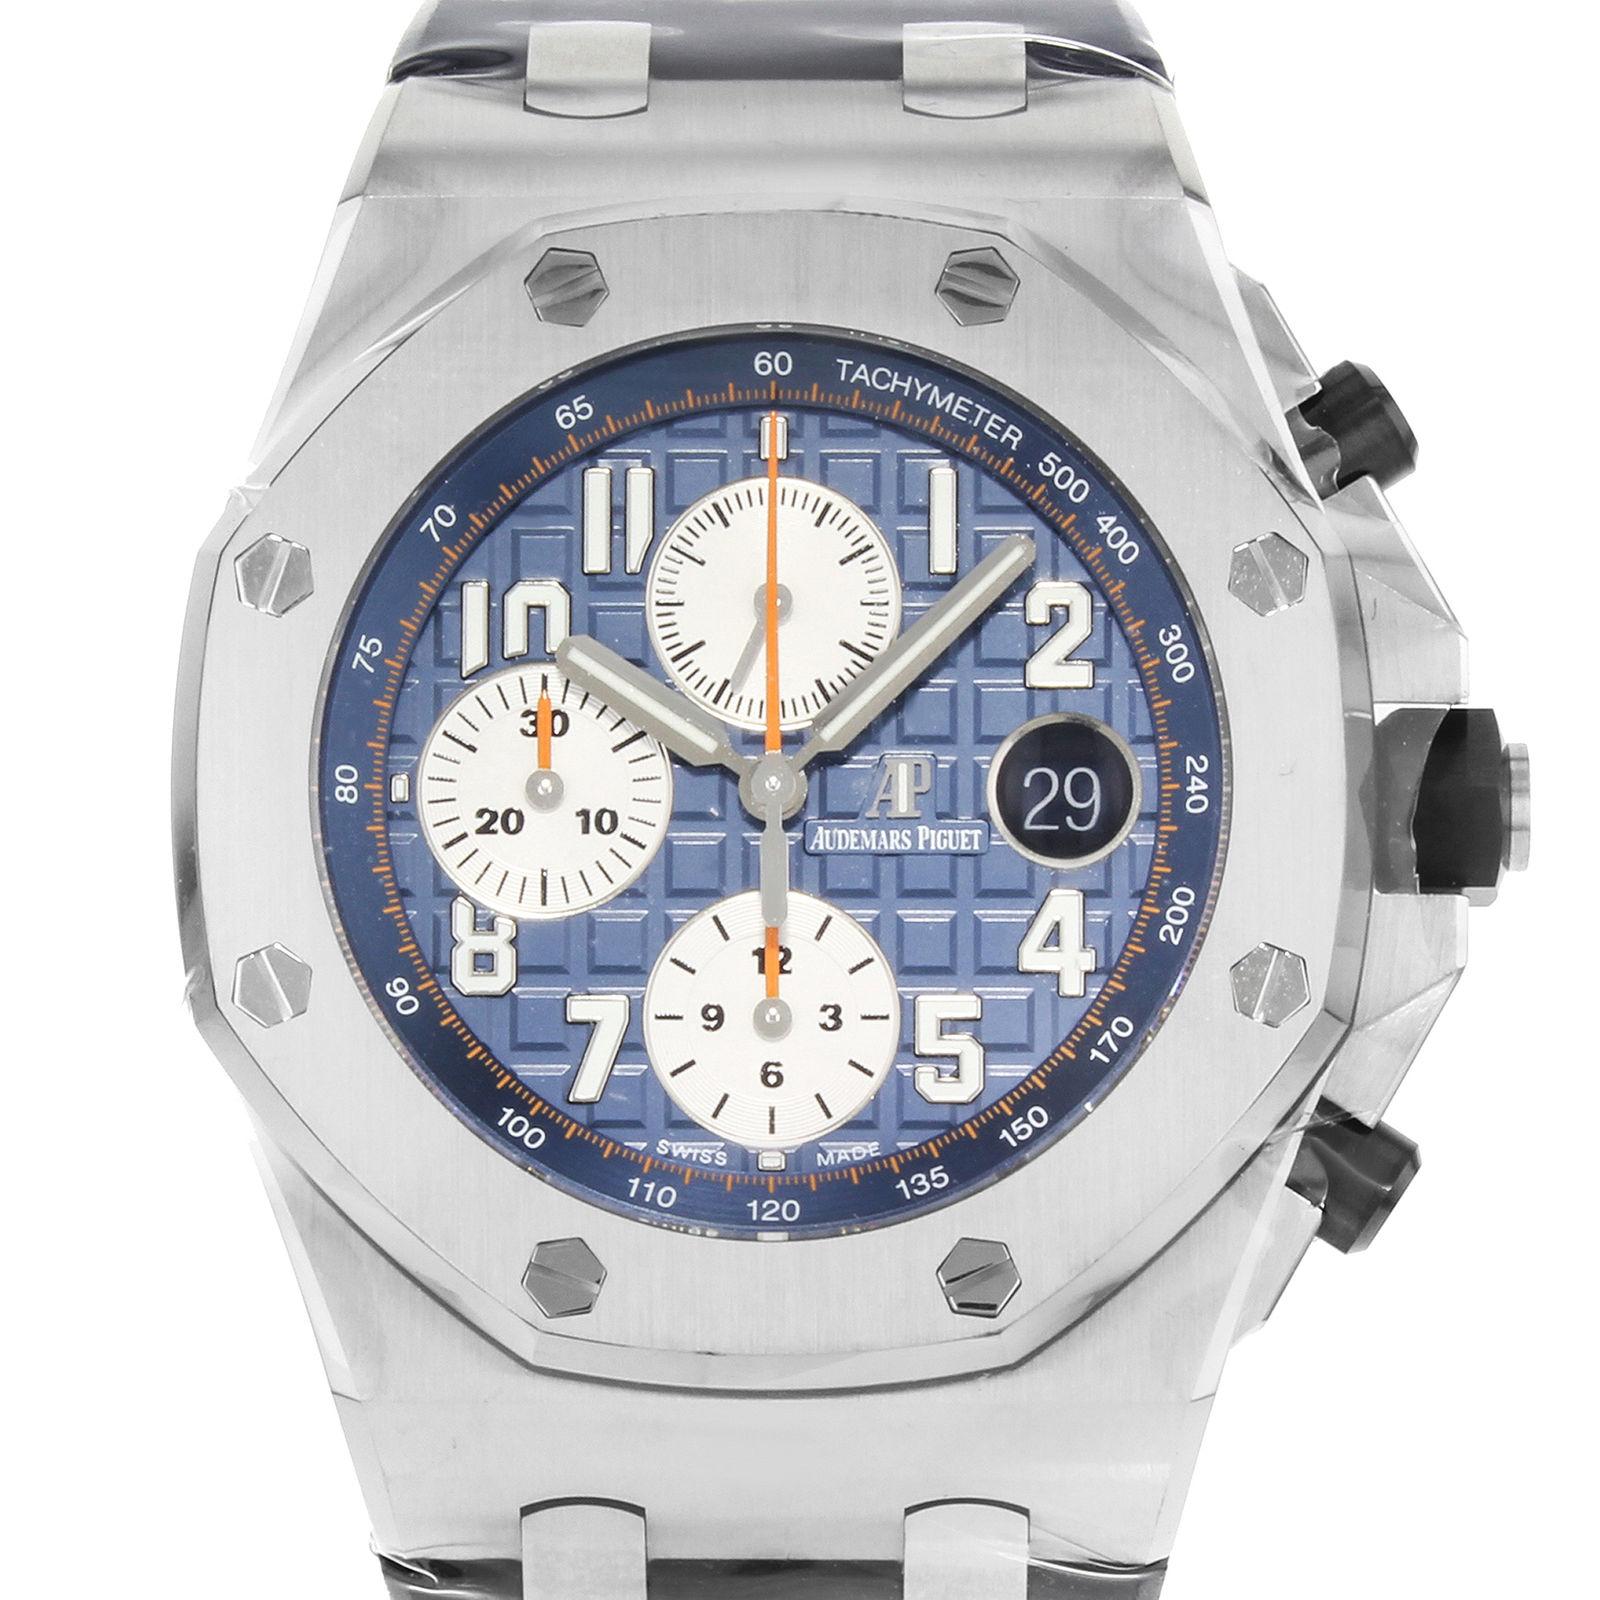 (16212)

Brand New with Box and Papers.

Brand	Audemars Piguet
Series	Royal Oak Offshore
Model Number	26470ST.OO.A027CA.01
Movement	Automatic Self Wind
Gender	Mens
Case Material	Stainless Steel
Case Shape	Octagonal
Case Diameter w/ crown	48mm
Case